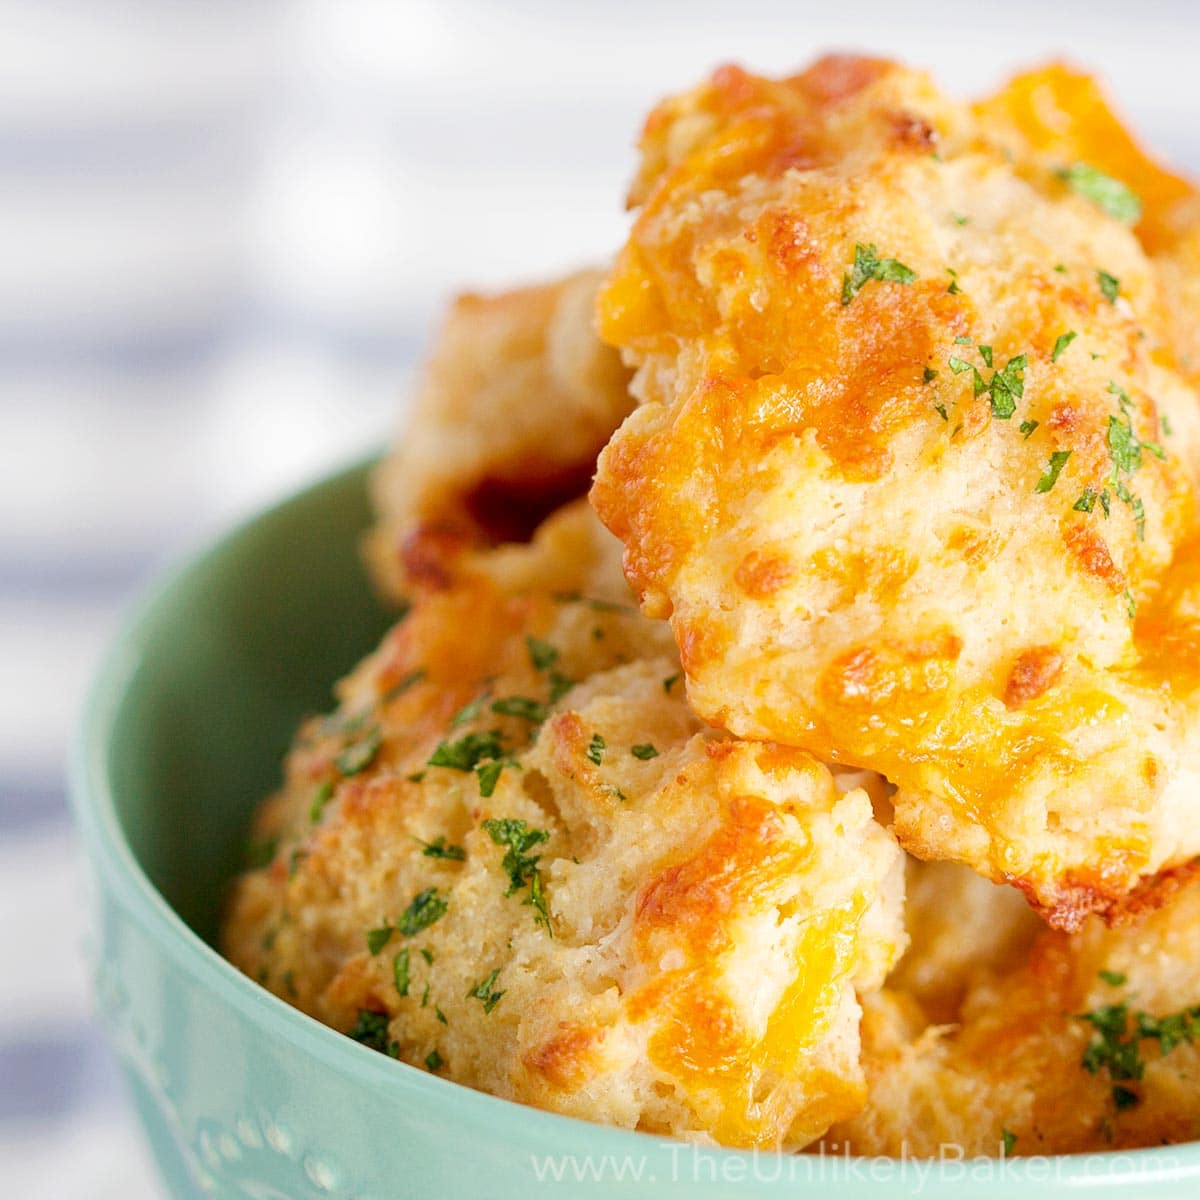 Red Lobster Homemade Cheesy Garlic Biscuits - Handle the Heat